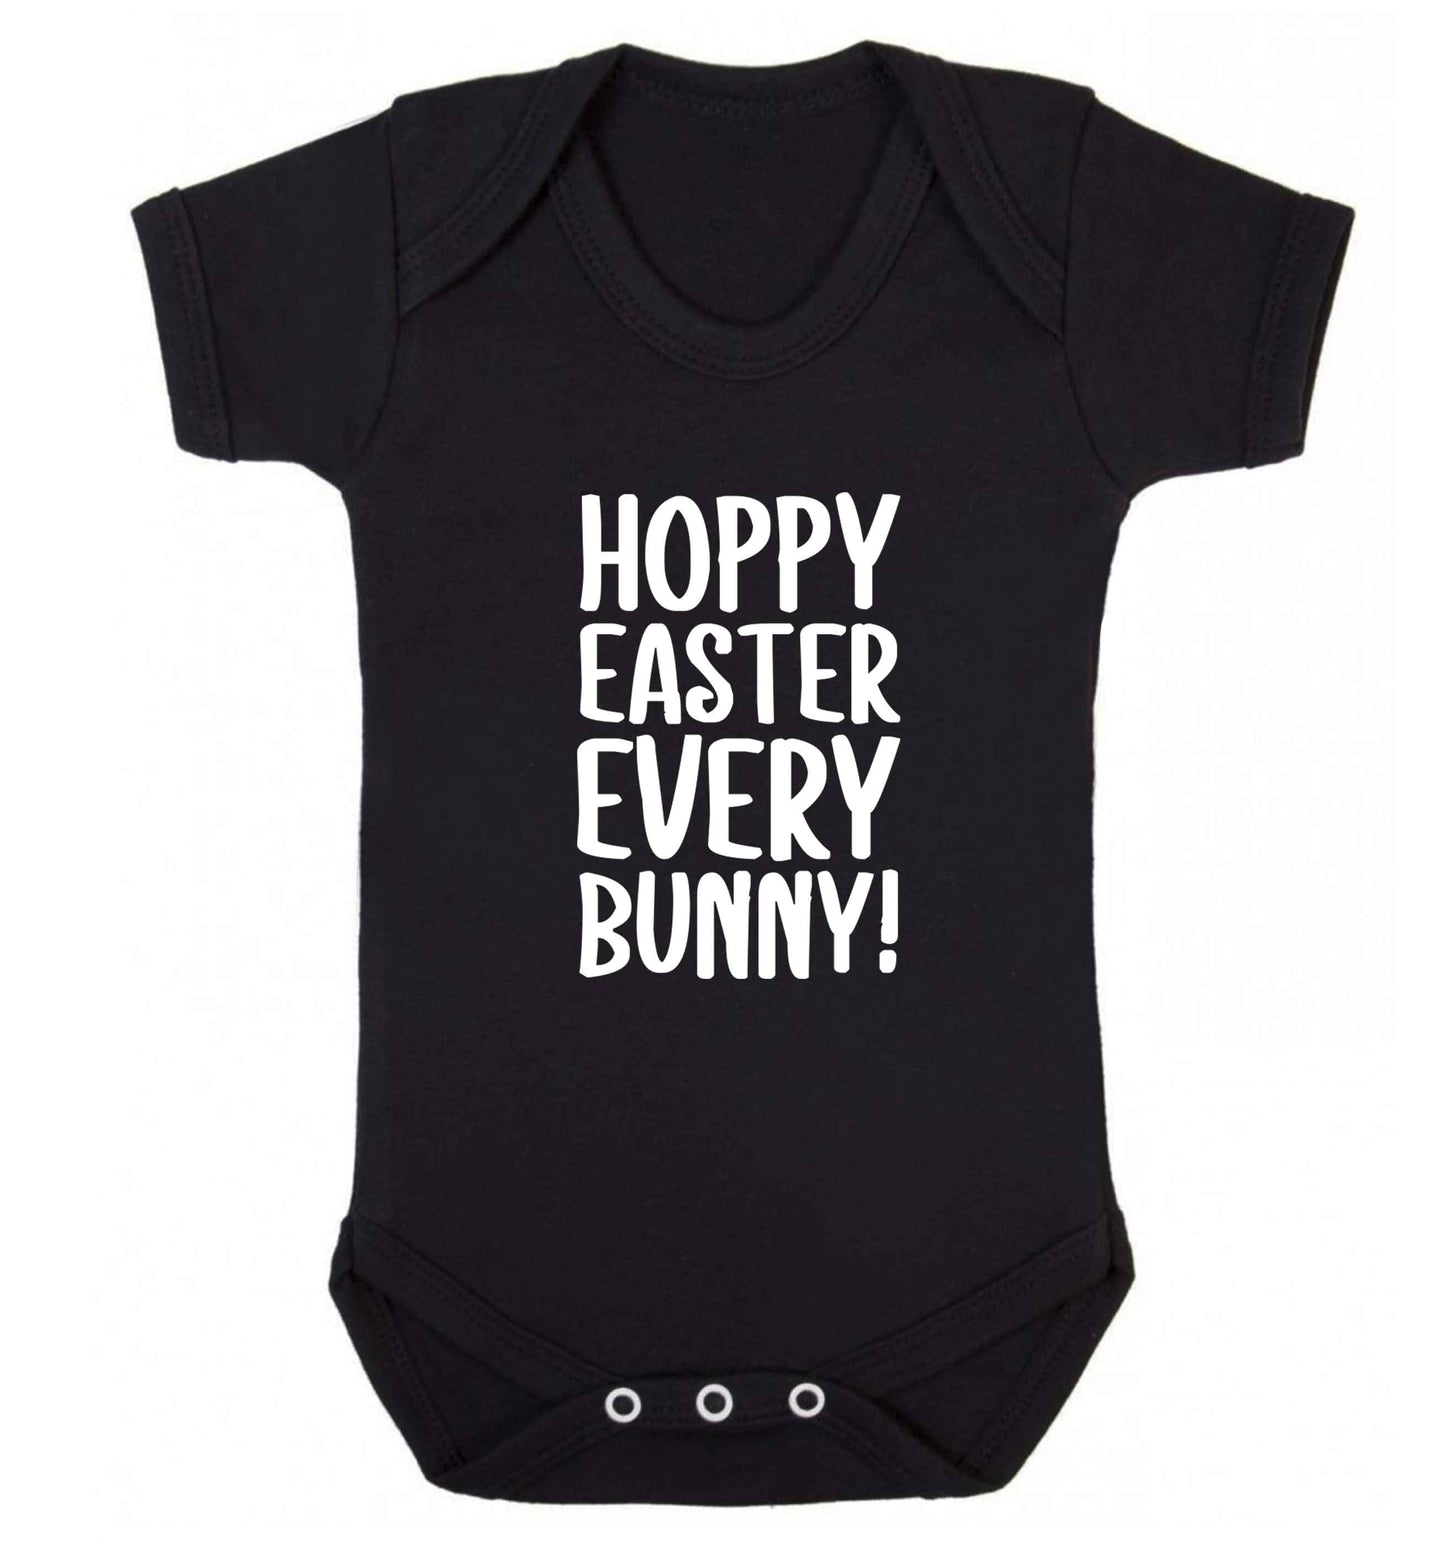 Hoppy Easter every bunny! baby vest black 18-24 months